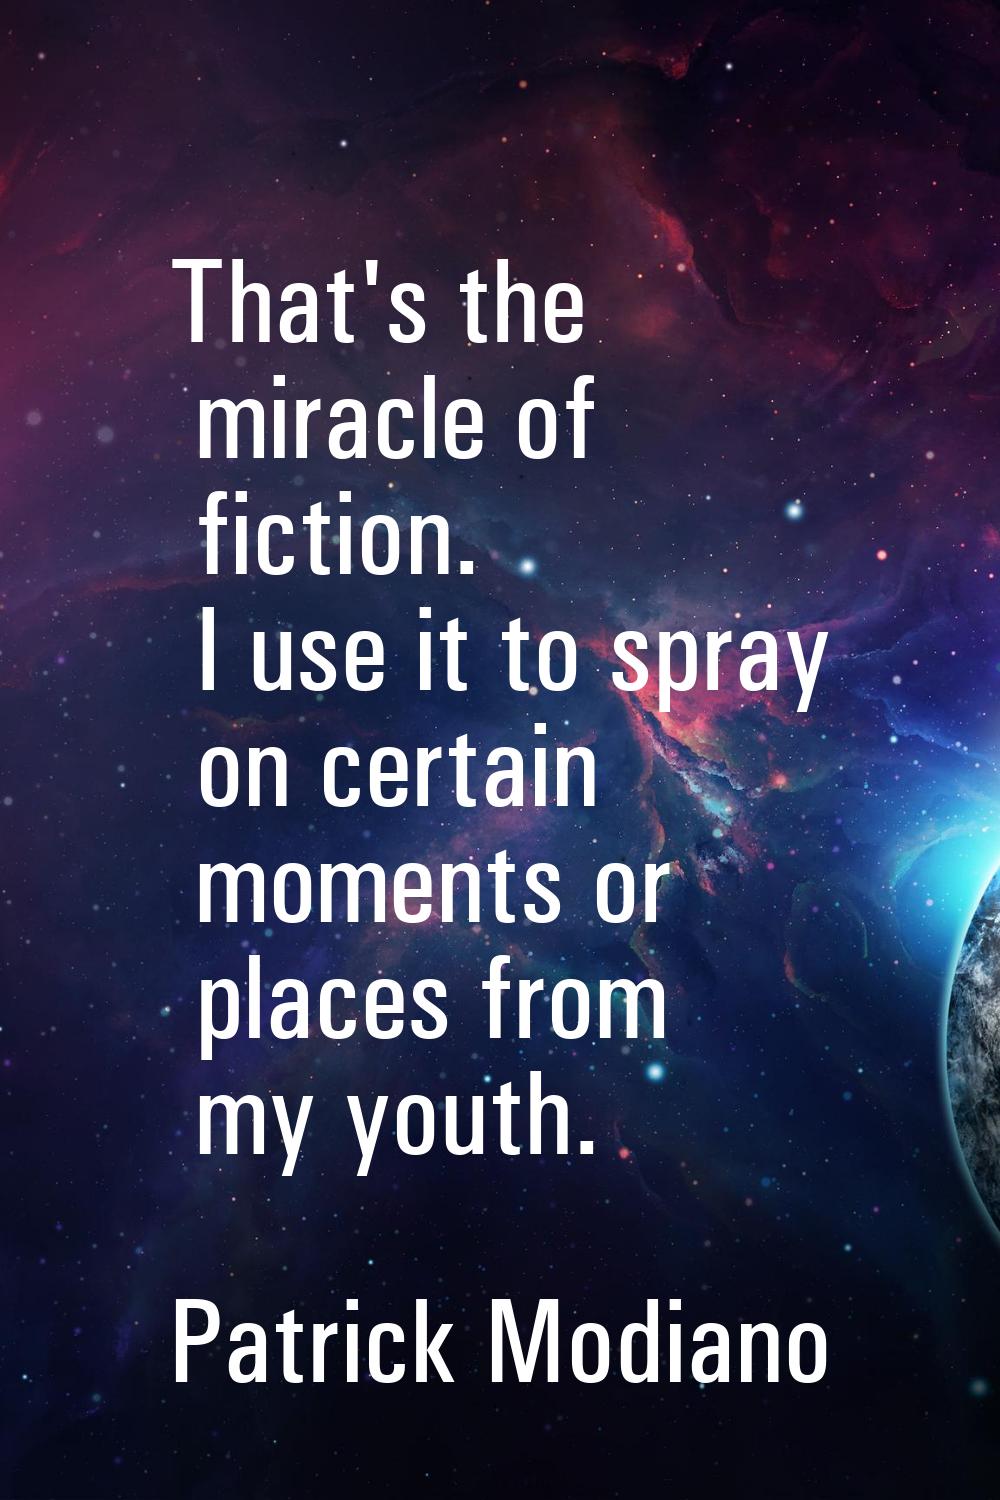 That's the miracle of fiction. I use it to spray on certain moments or places from my youth.